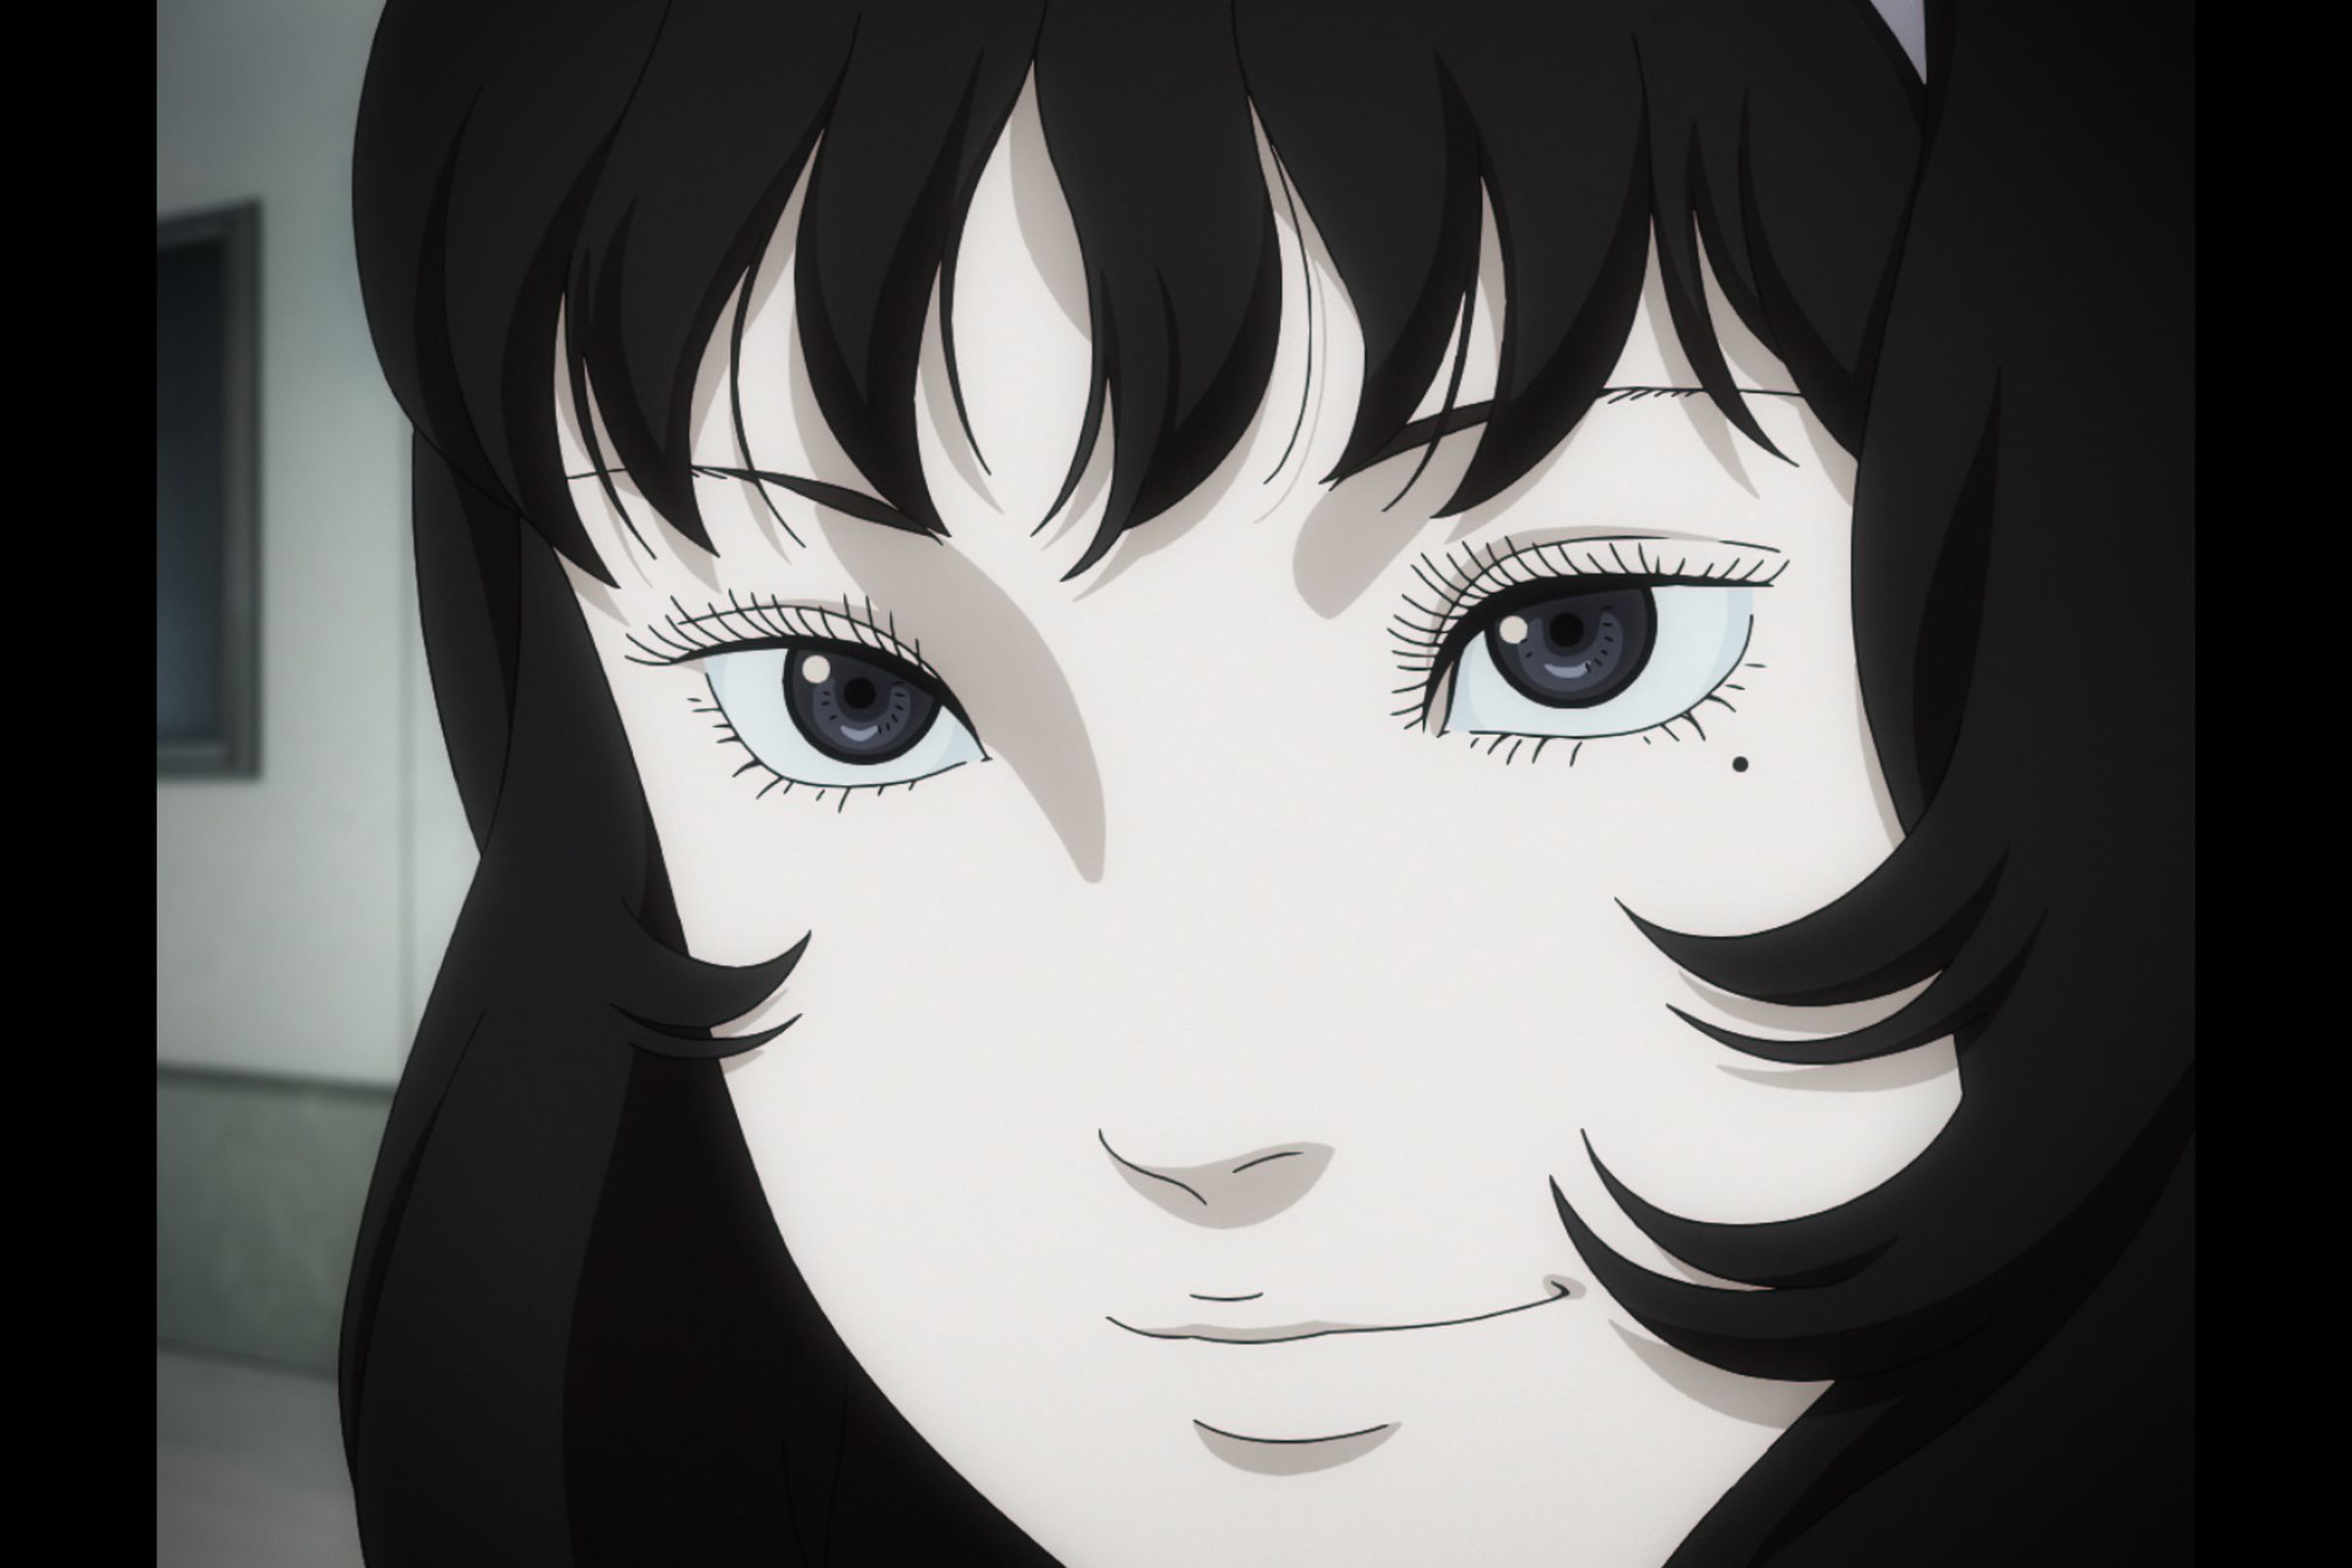 Netflix’s new anime is just a taste of Junji Ito’s terrifying stories